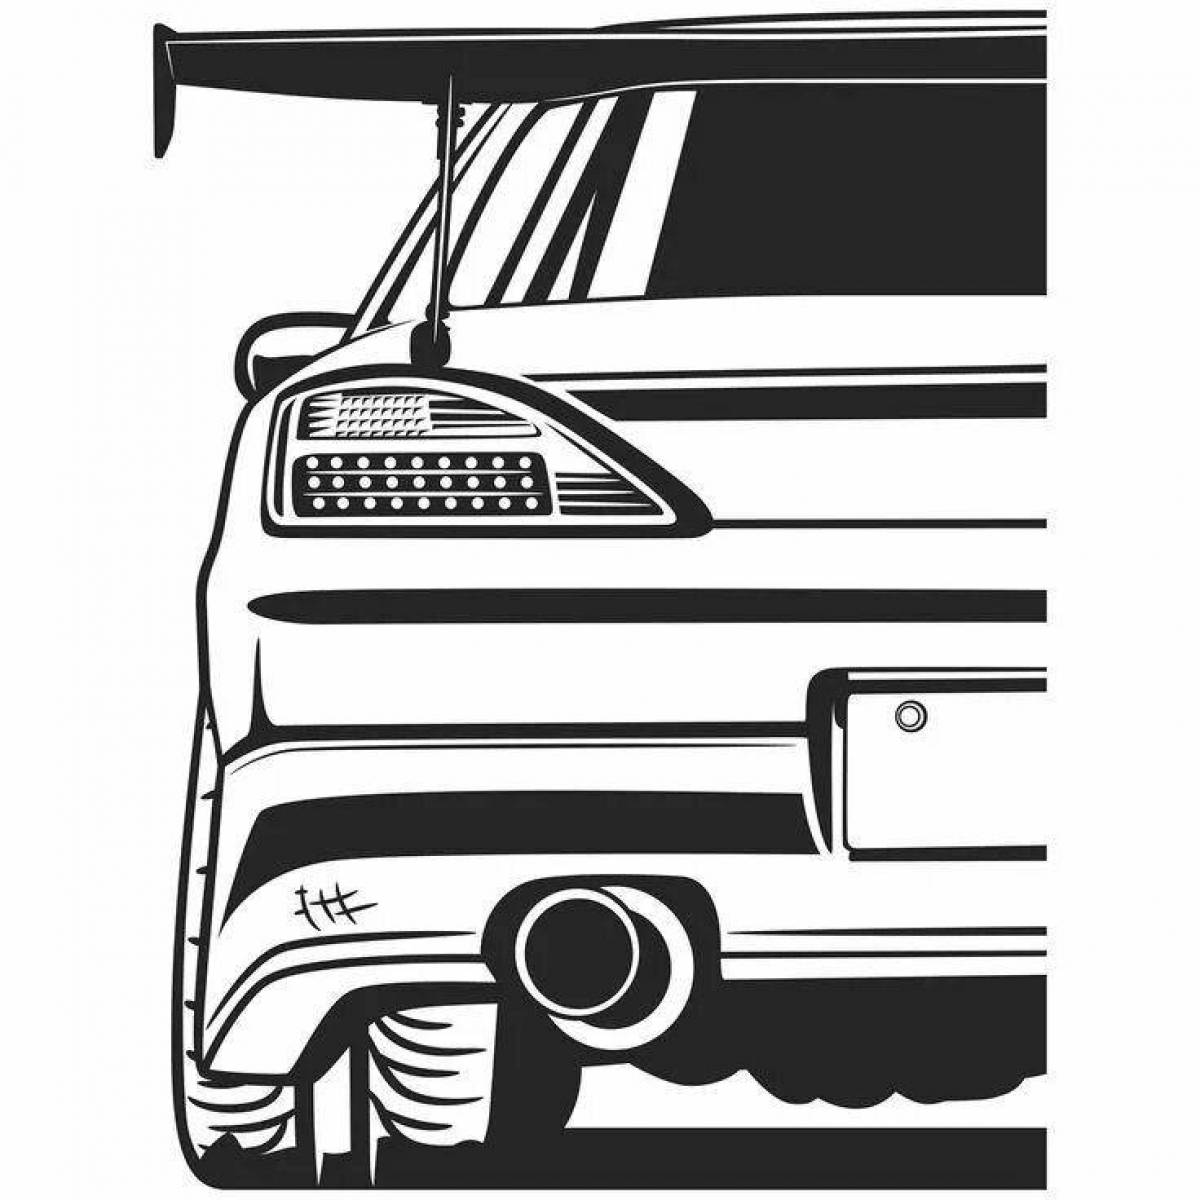 Jdm fat coloring page